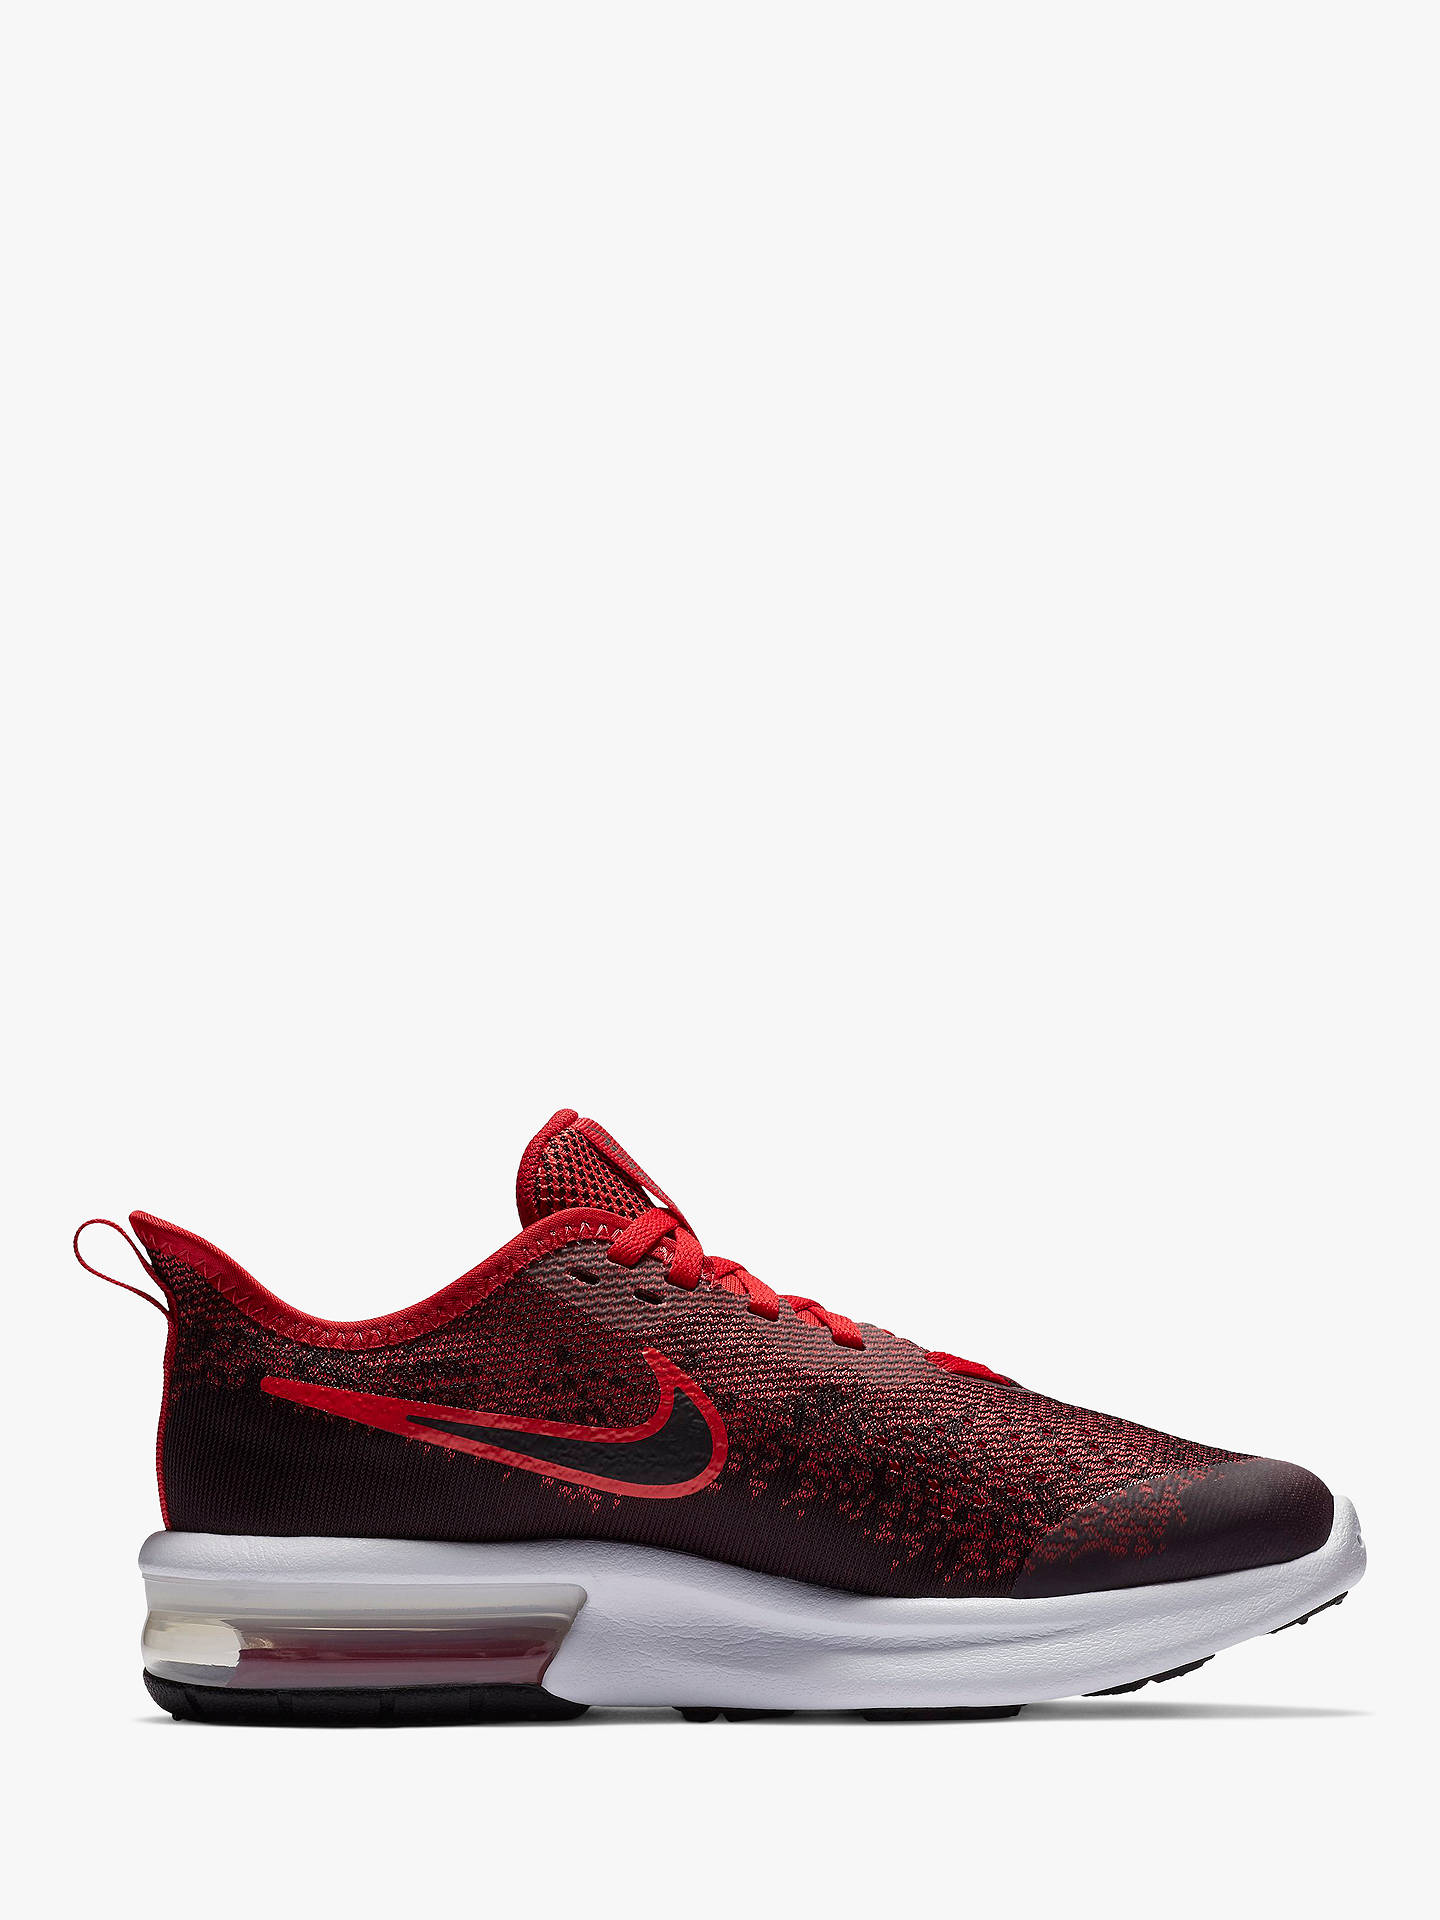 Nike Children's Air Max Sequent 4 Trainers, Black/Red at John Lewis ...